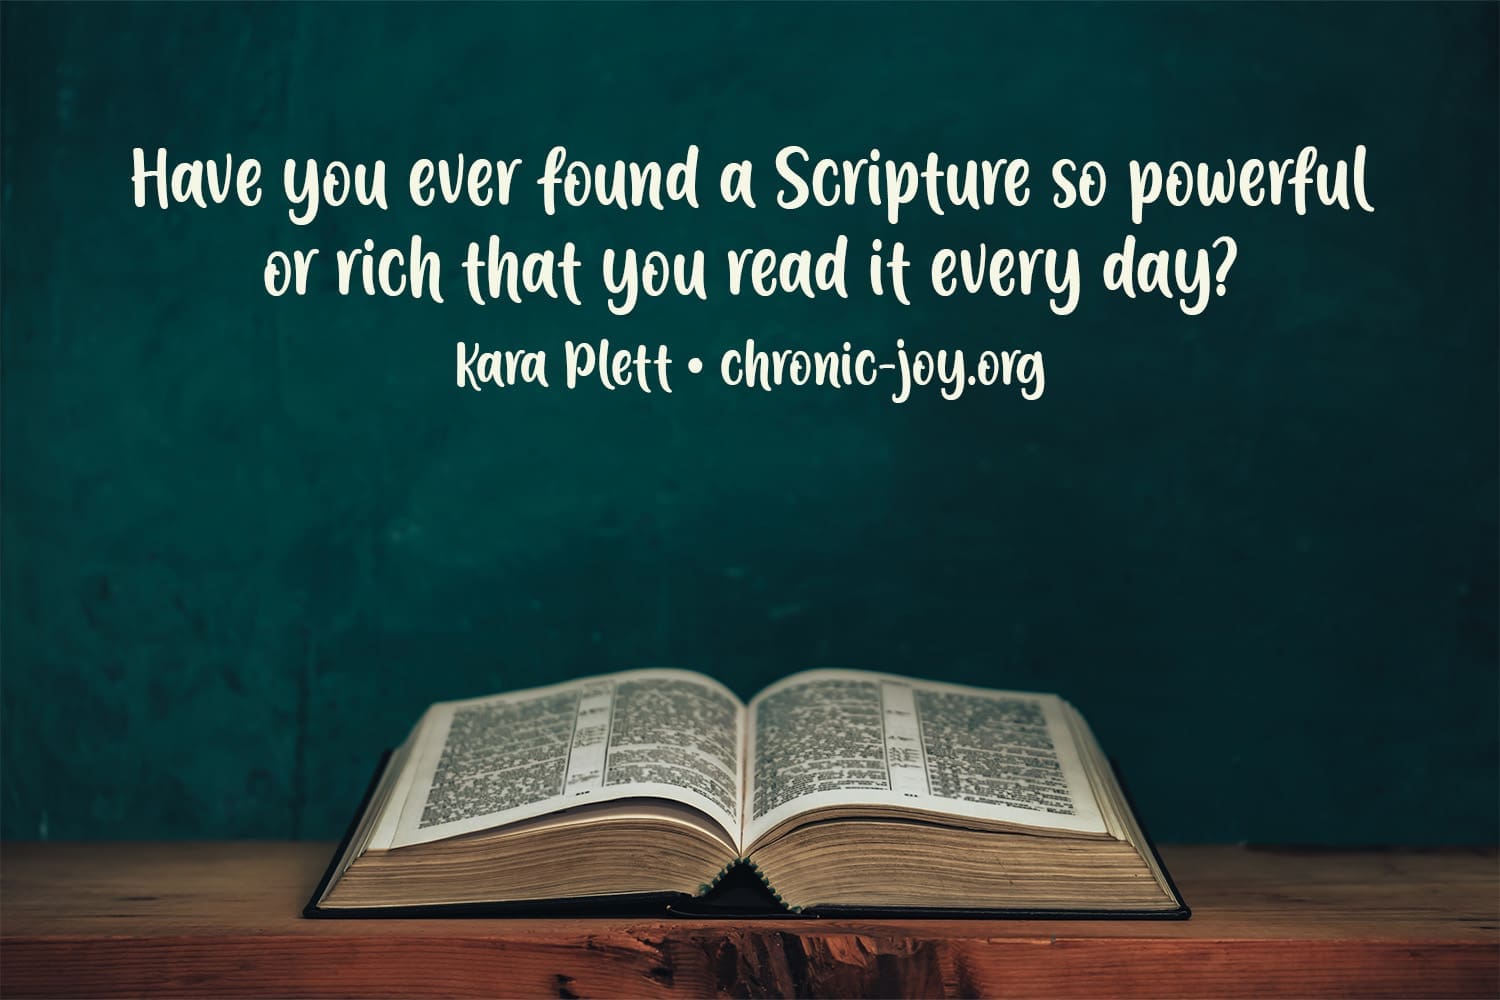 "Have you ever found a Scripture so powerful or rich that you read it every day?" Kara Plett